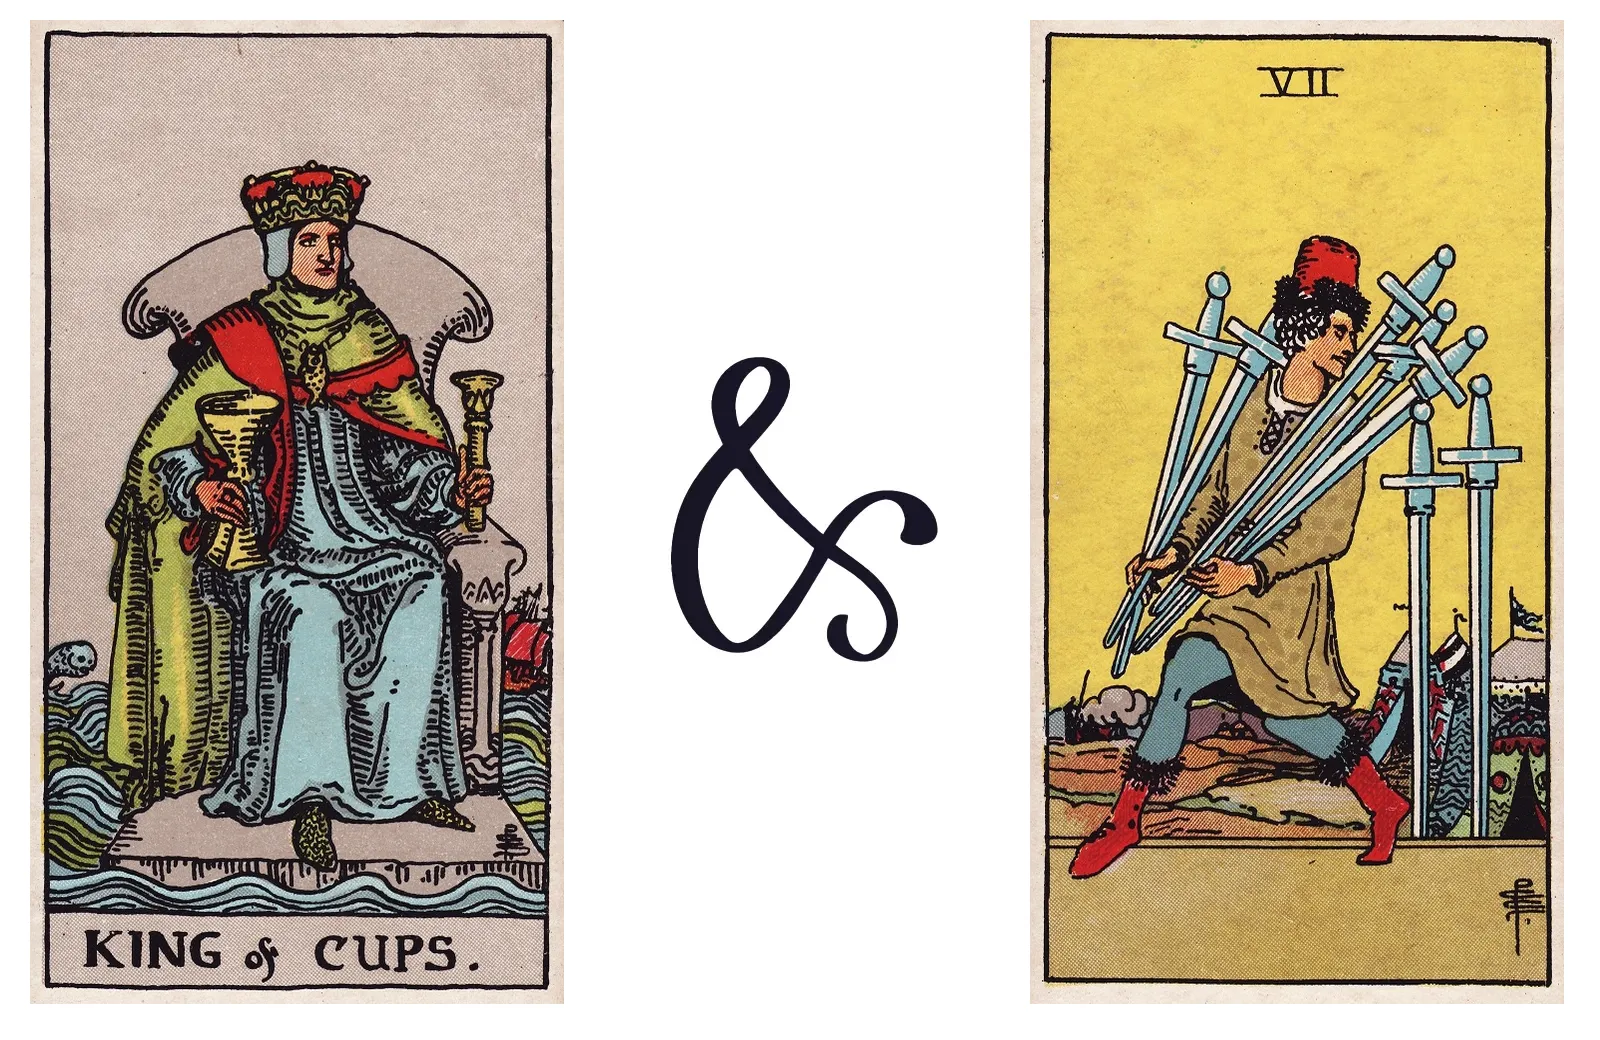 King of Cups and Seven of Swords